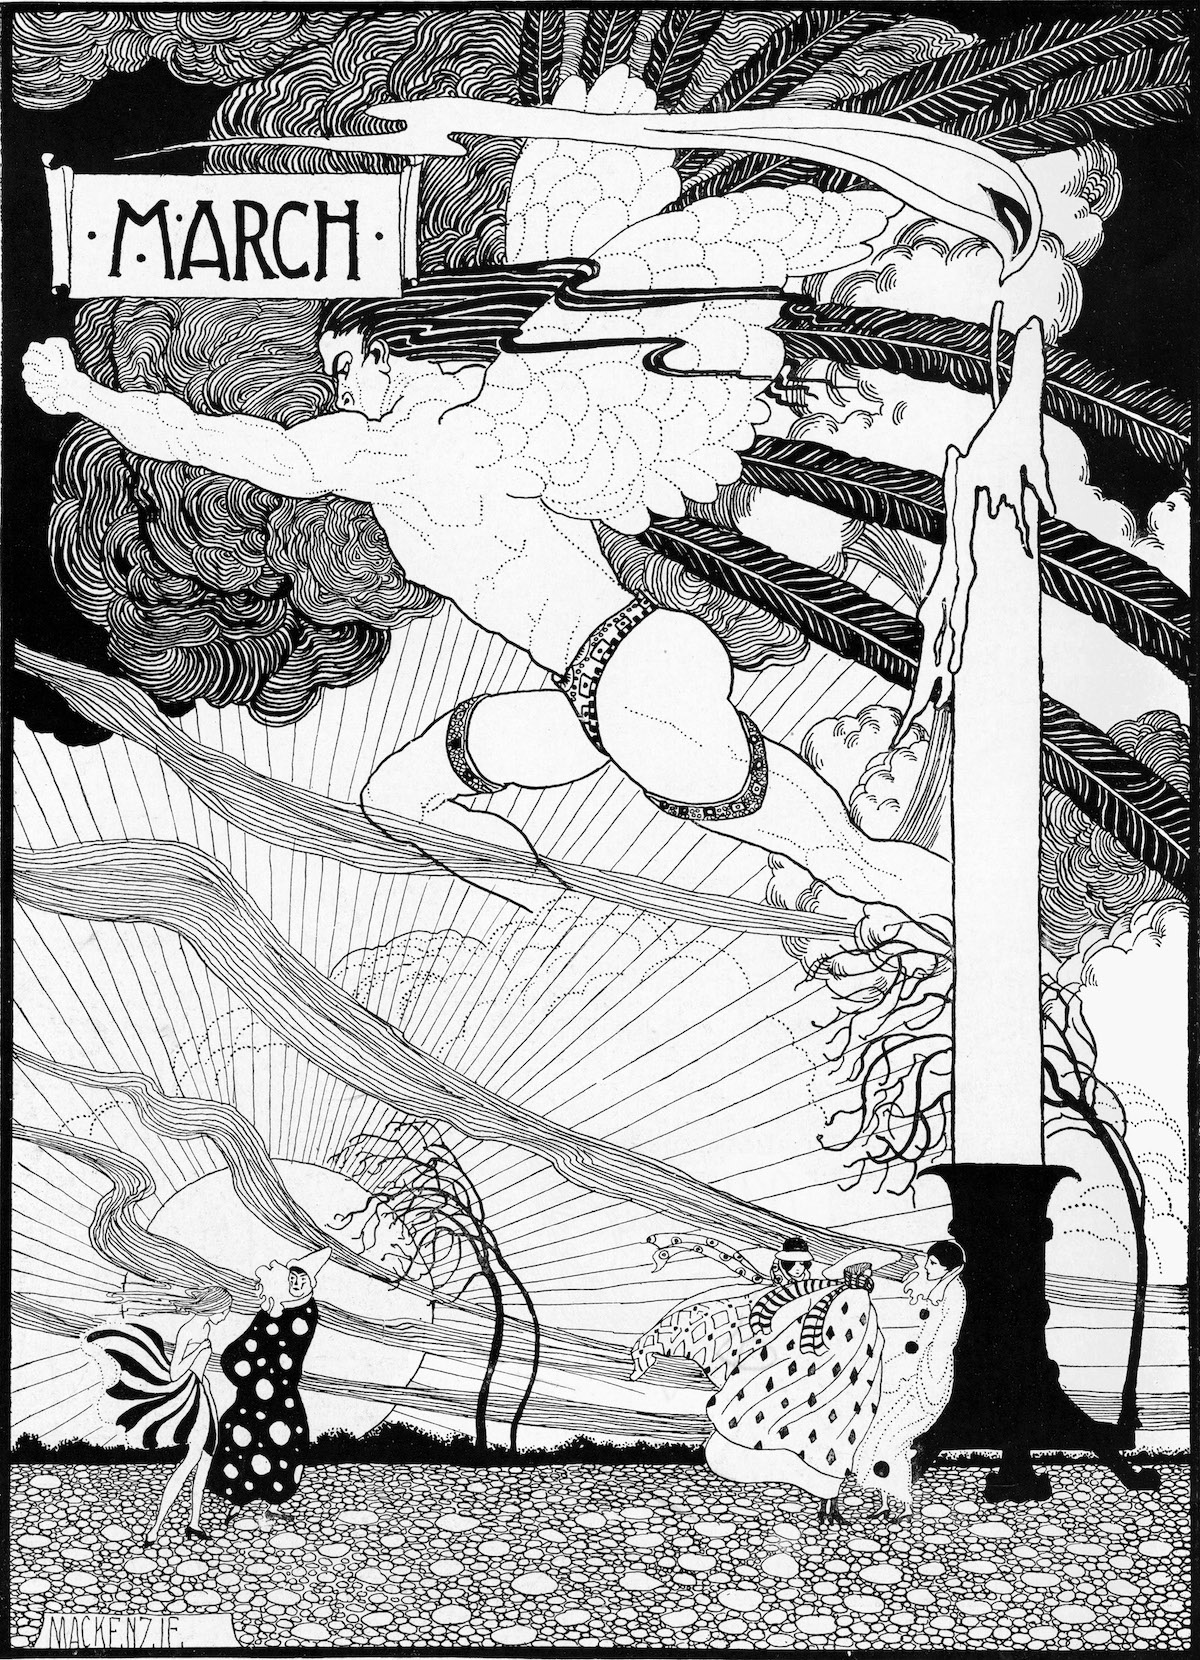 Stormy weather: illustration for the month of March by Mackenzie in The Sketch, 1 March 1916. Illustrated London News/Mary Evans.